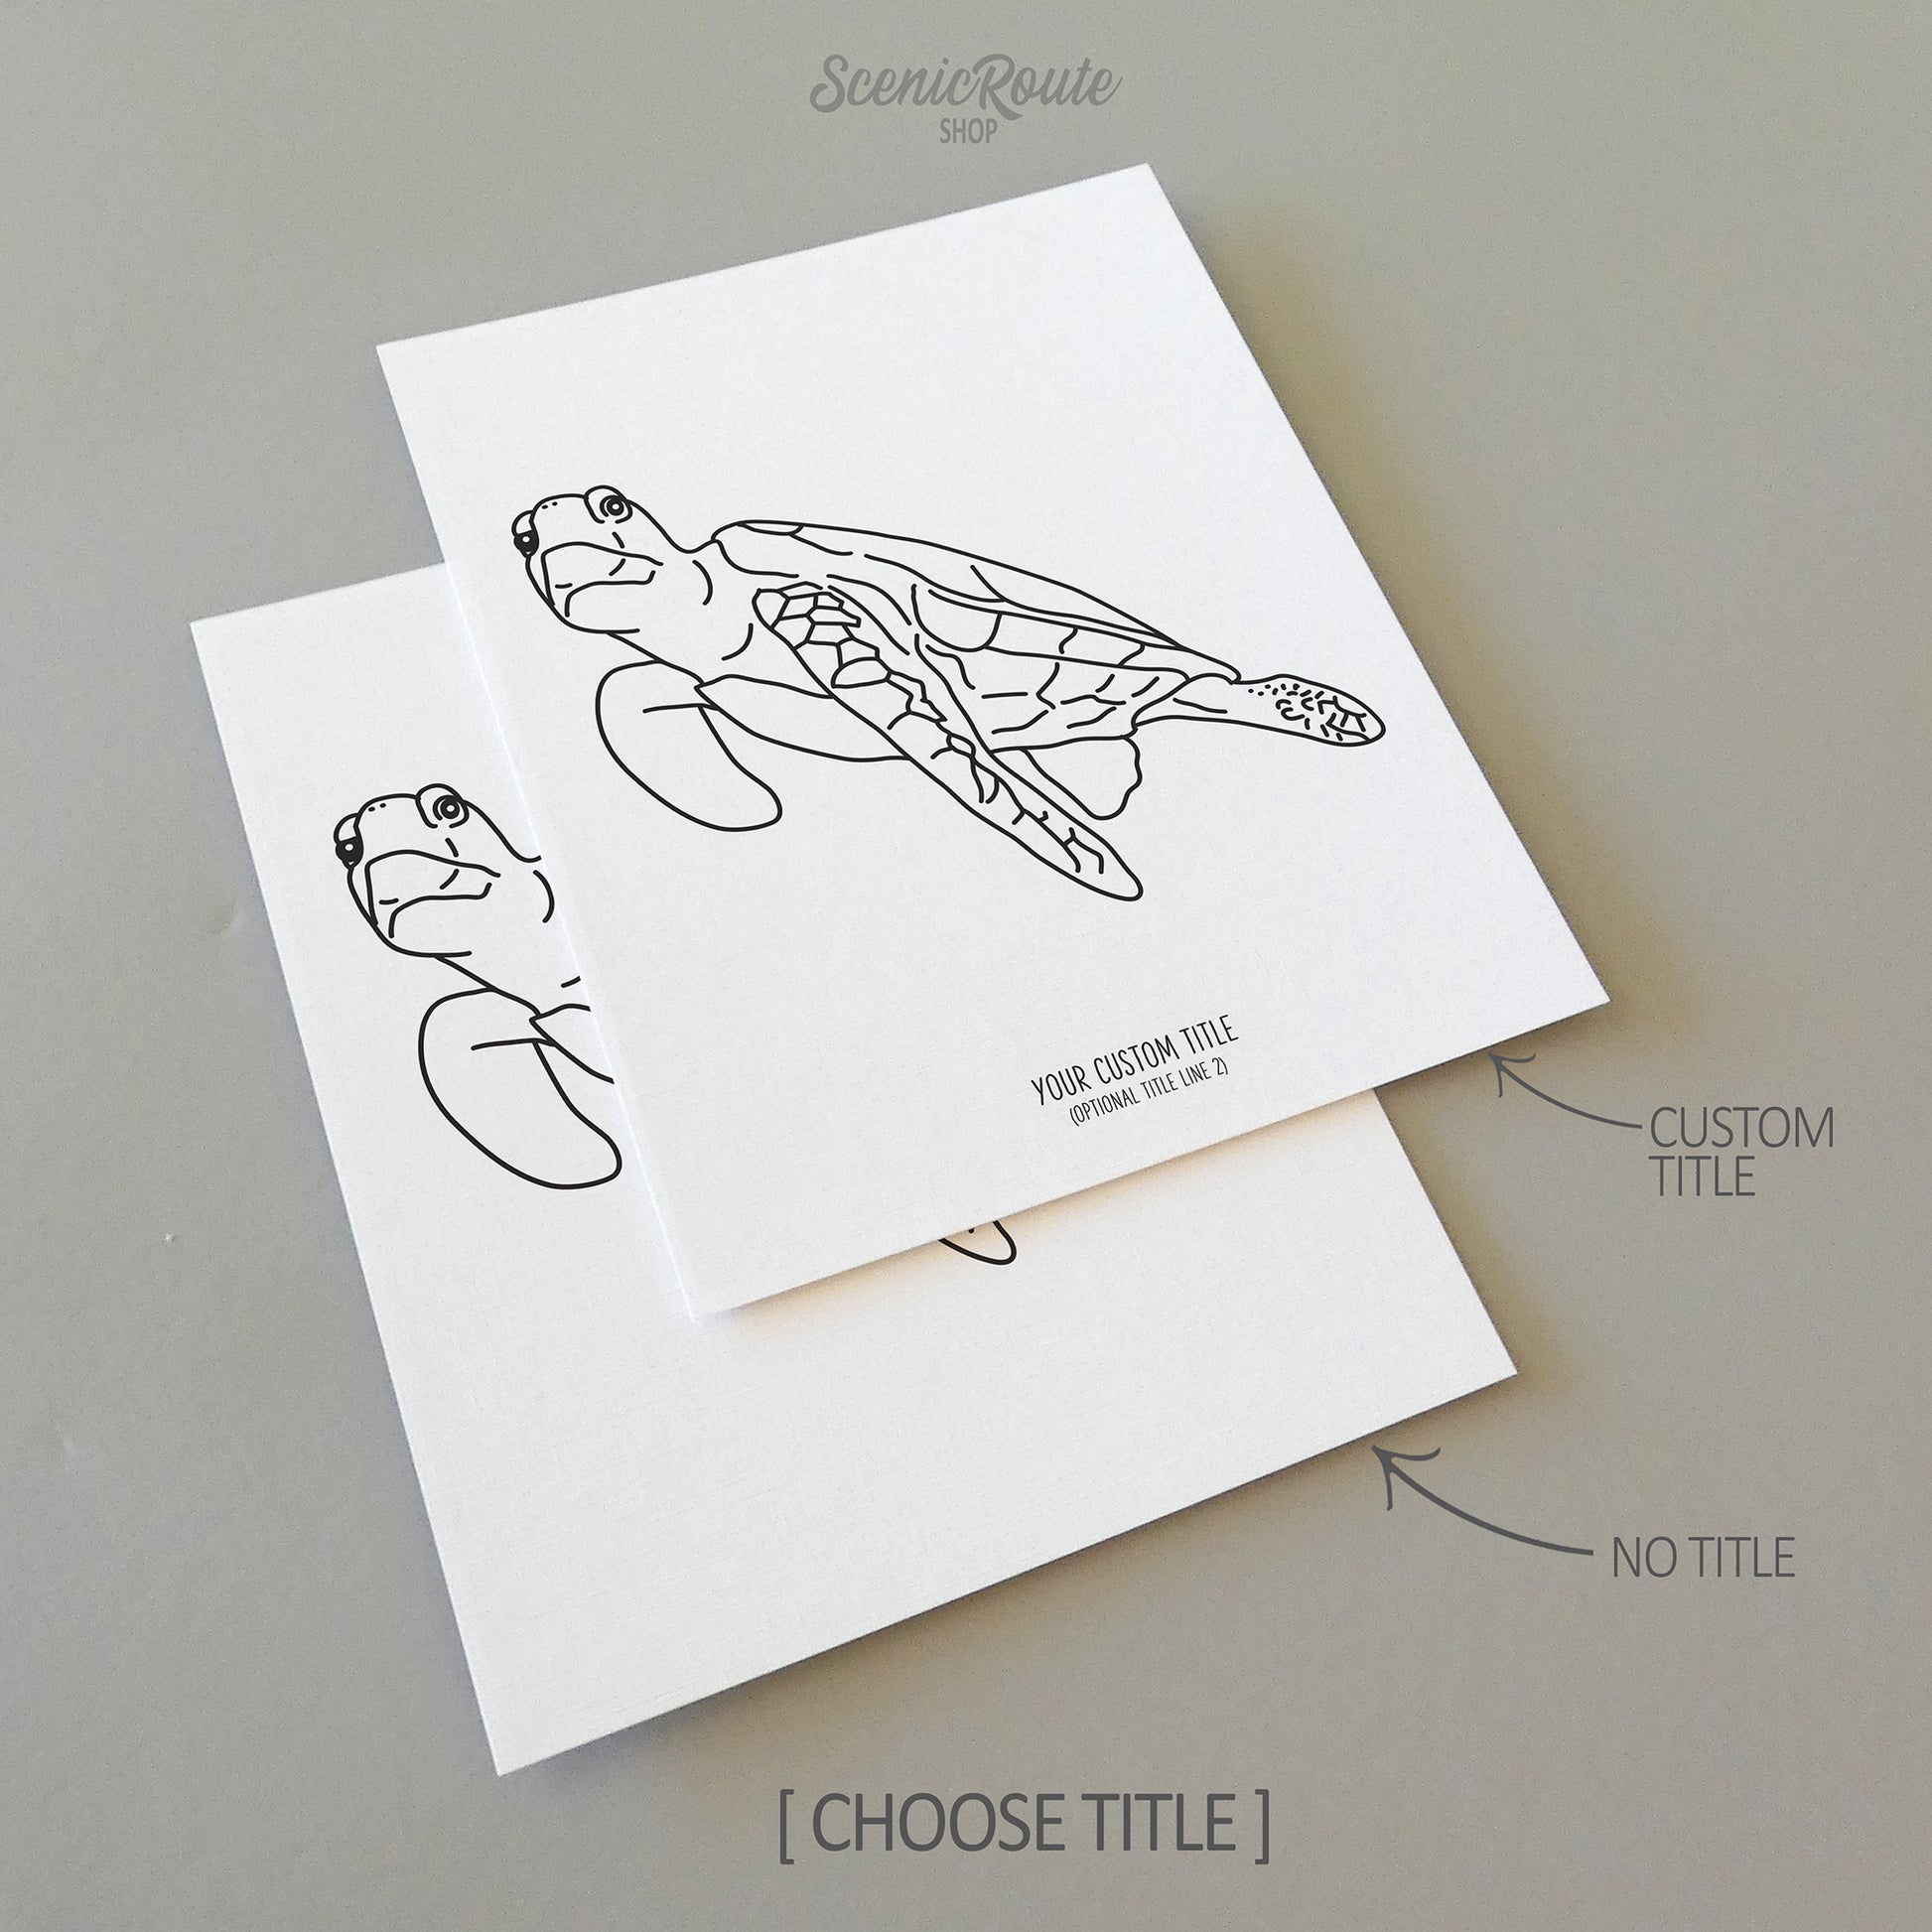 Two line art drawings of a Sea Turtle on white linen paper with a gray background.  The pieces are shown with “No Title” and “Custom Title” options for the available art print options.